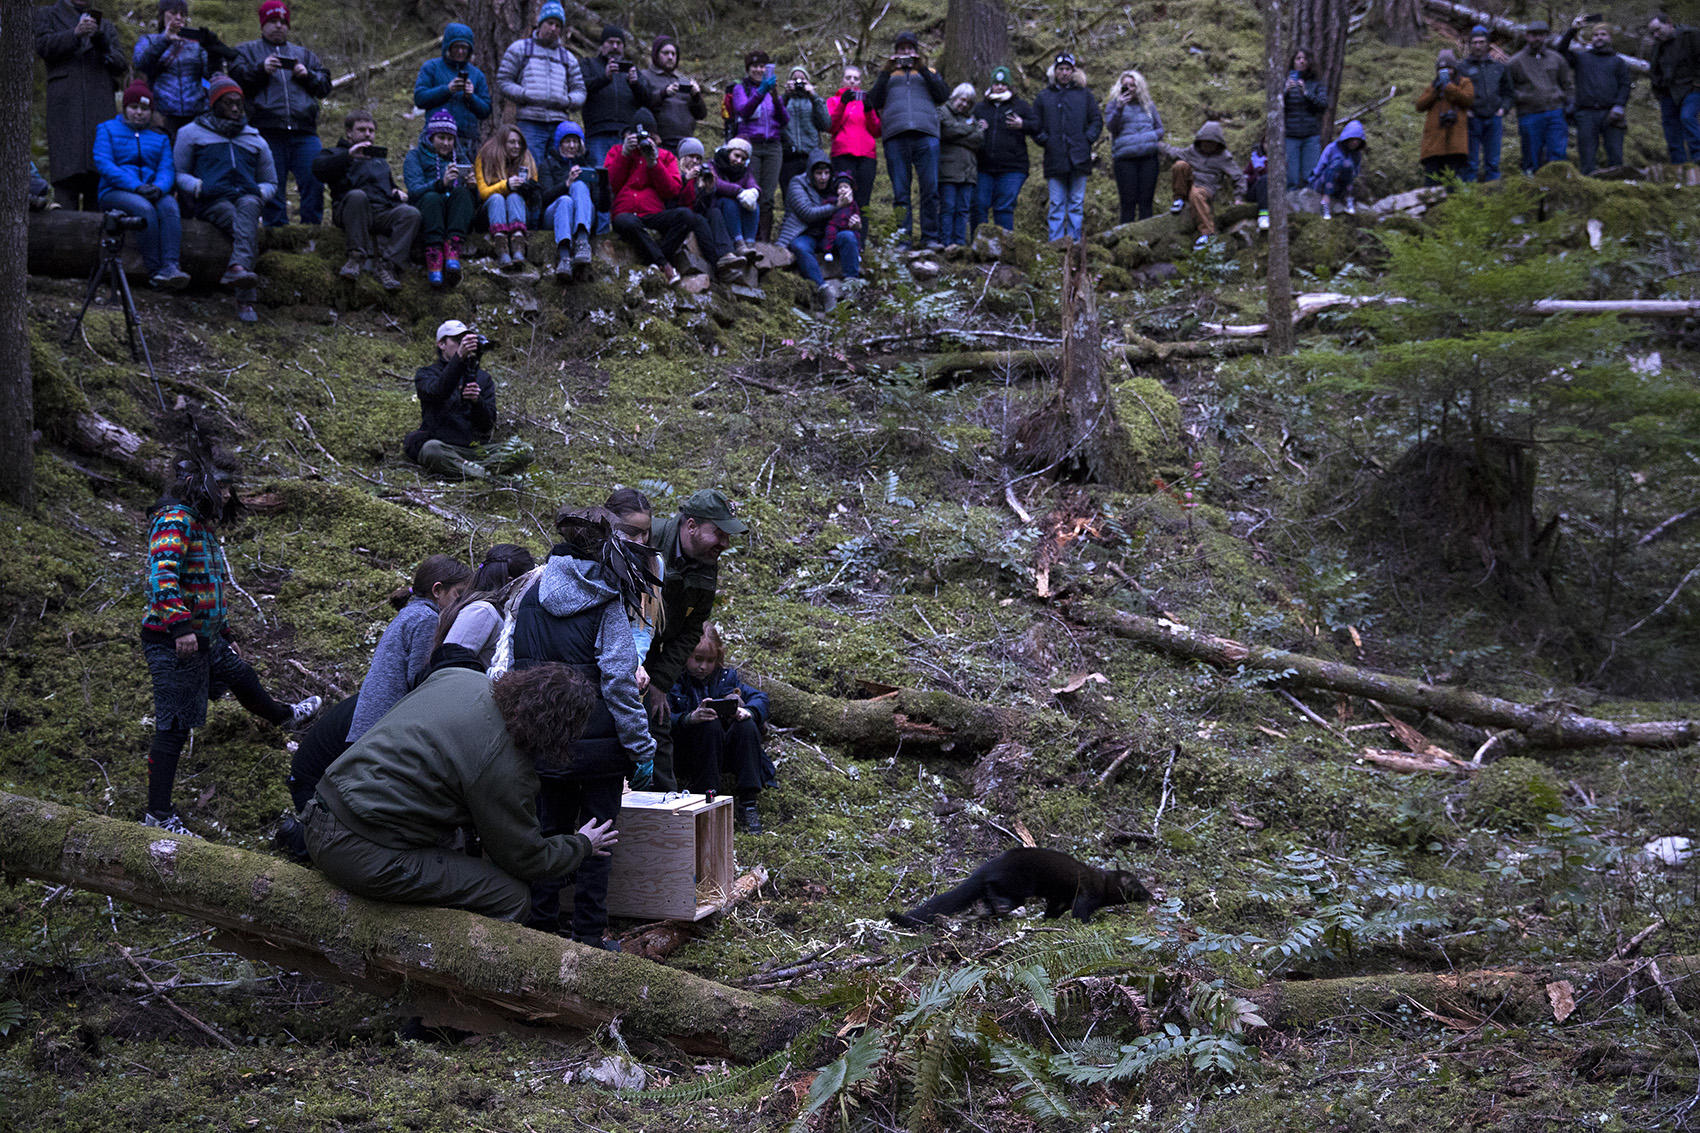 One of the six fishers is released on Wednesday December 5, 2018, at the North Cascades Visitor Center in Newhalem. CREDIT: KUOW PHOTO/MEGAN FARMER